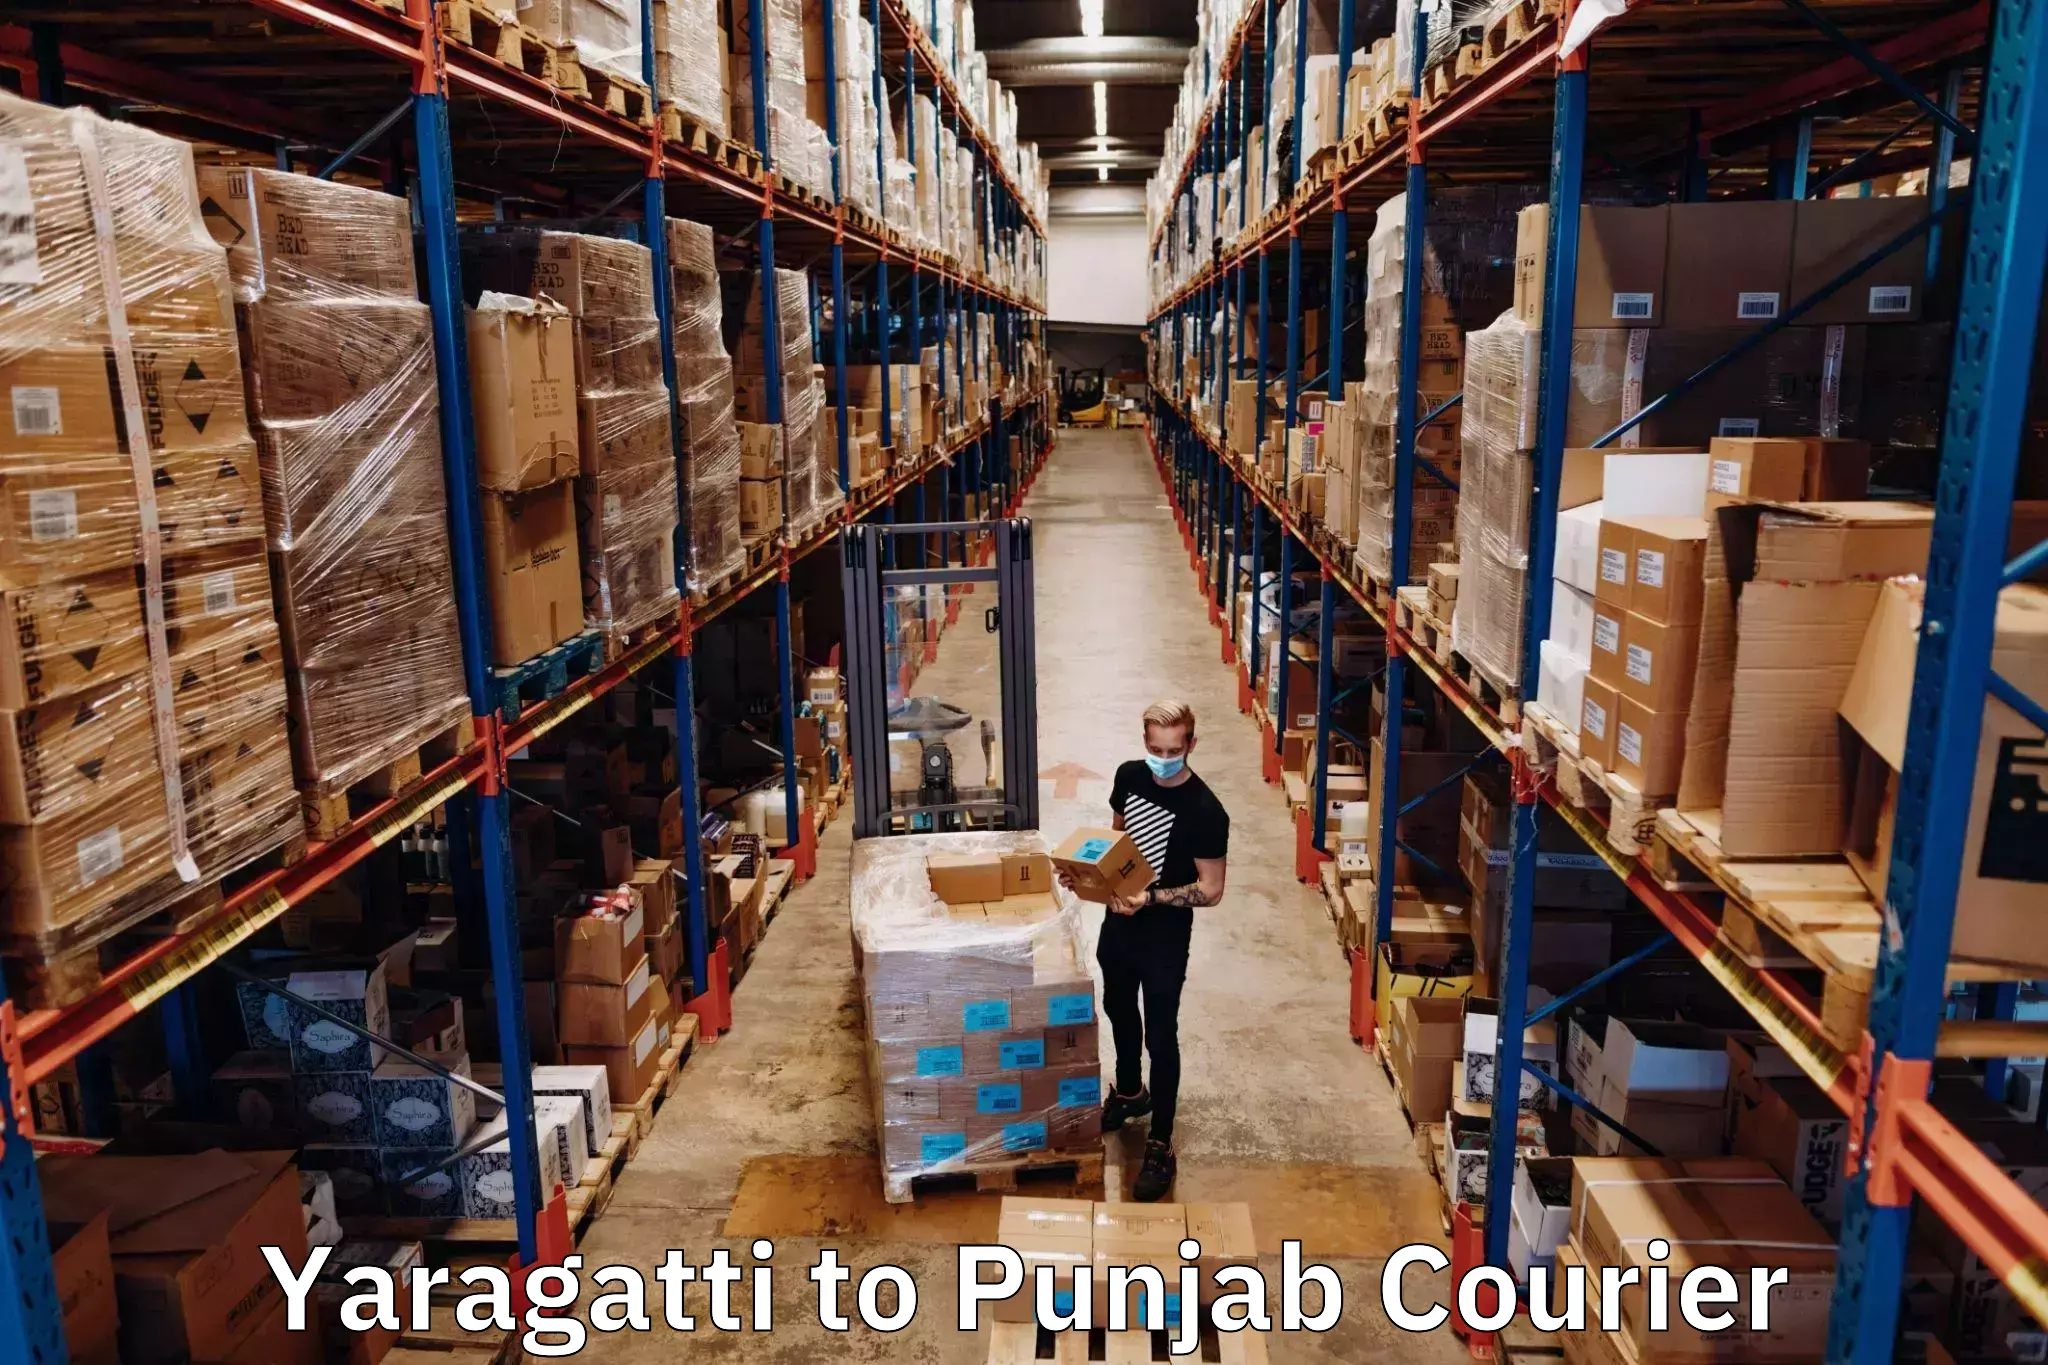 Multi-national courier services Yaragatti to Zira